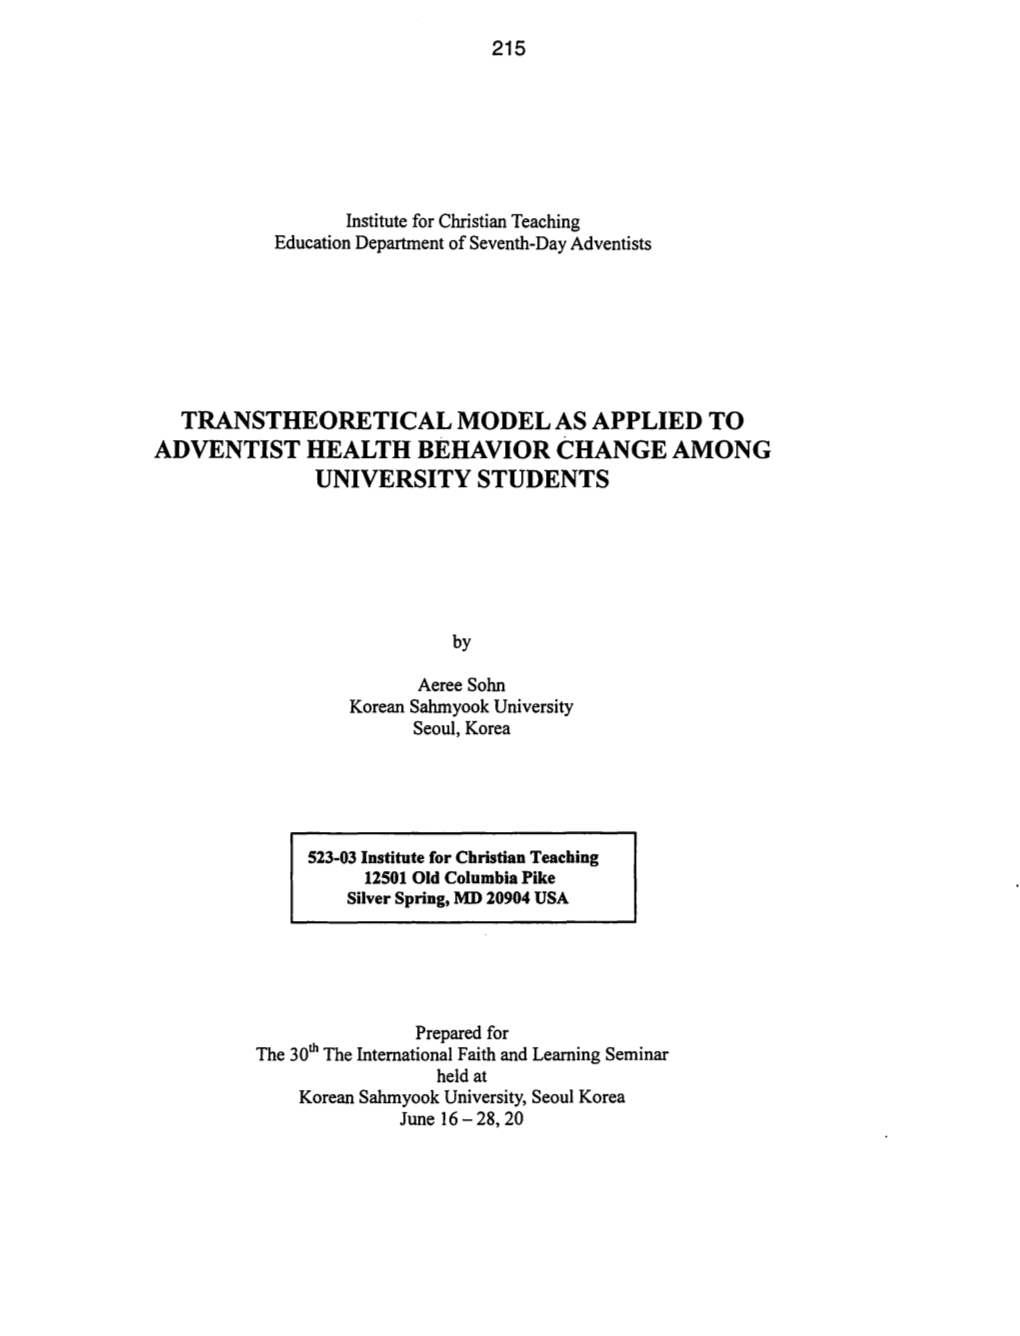 Transtheoretical Model As Applied to Adventist Health Behavior Change Among University Students